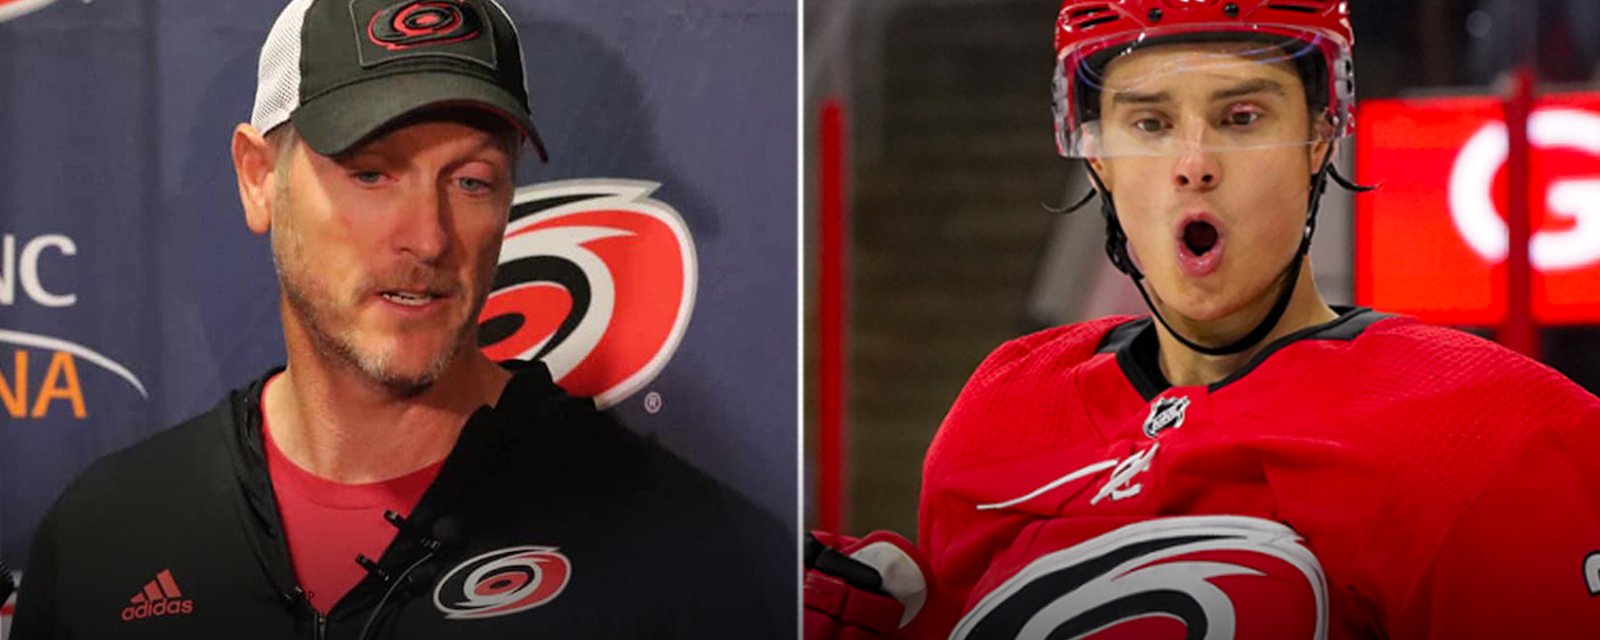 Breaking: Hurricanes owner Tom Dundon responds to Aho offersheet